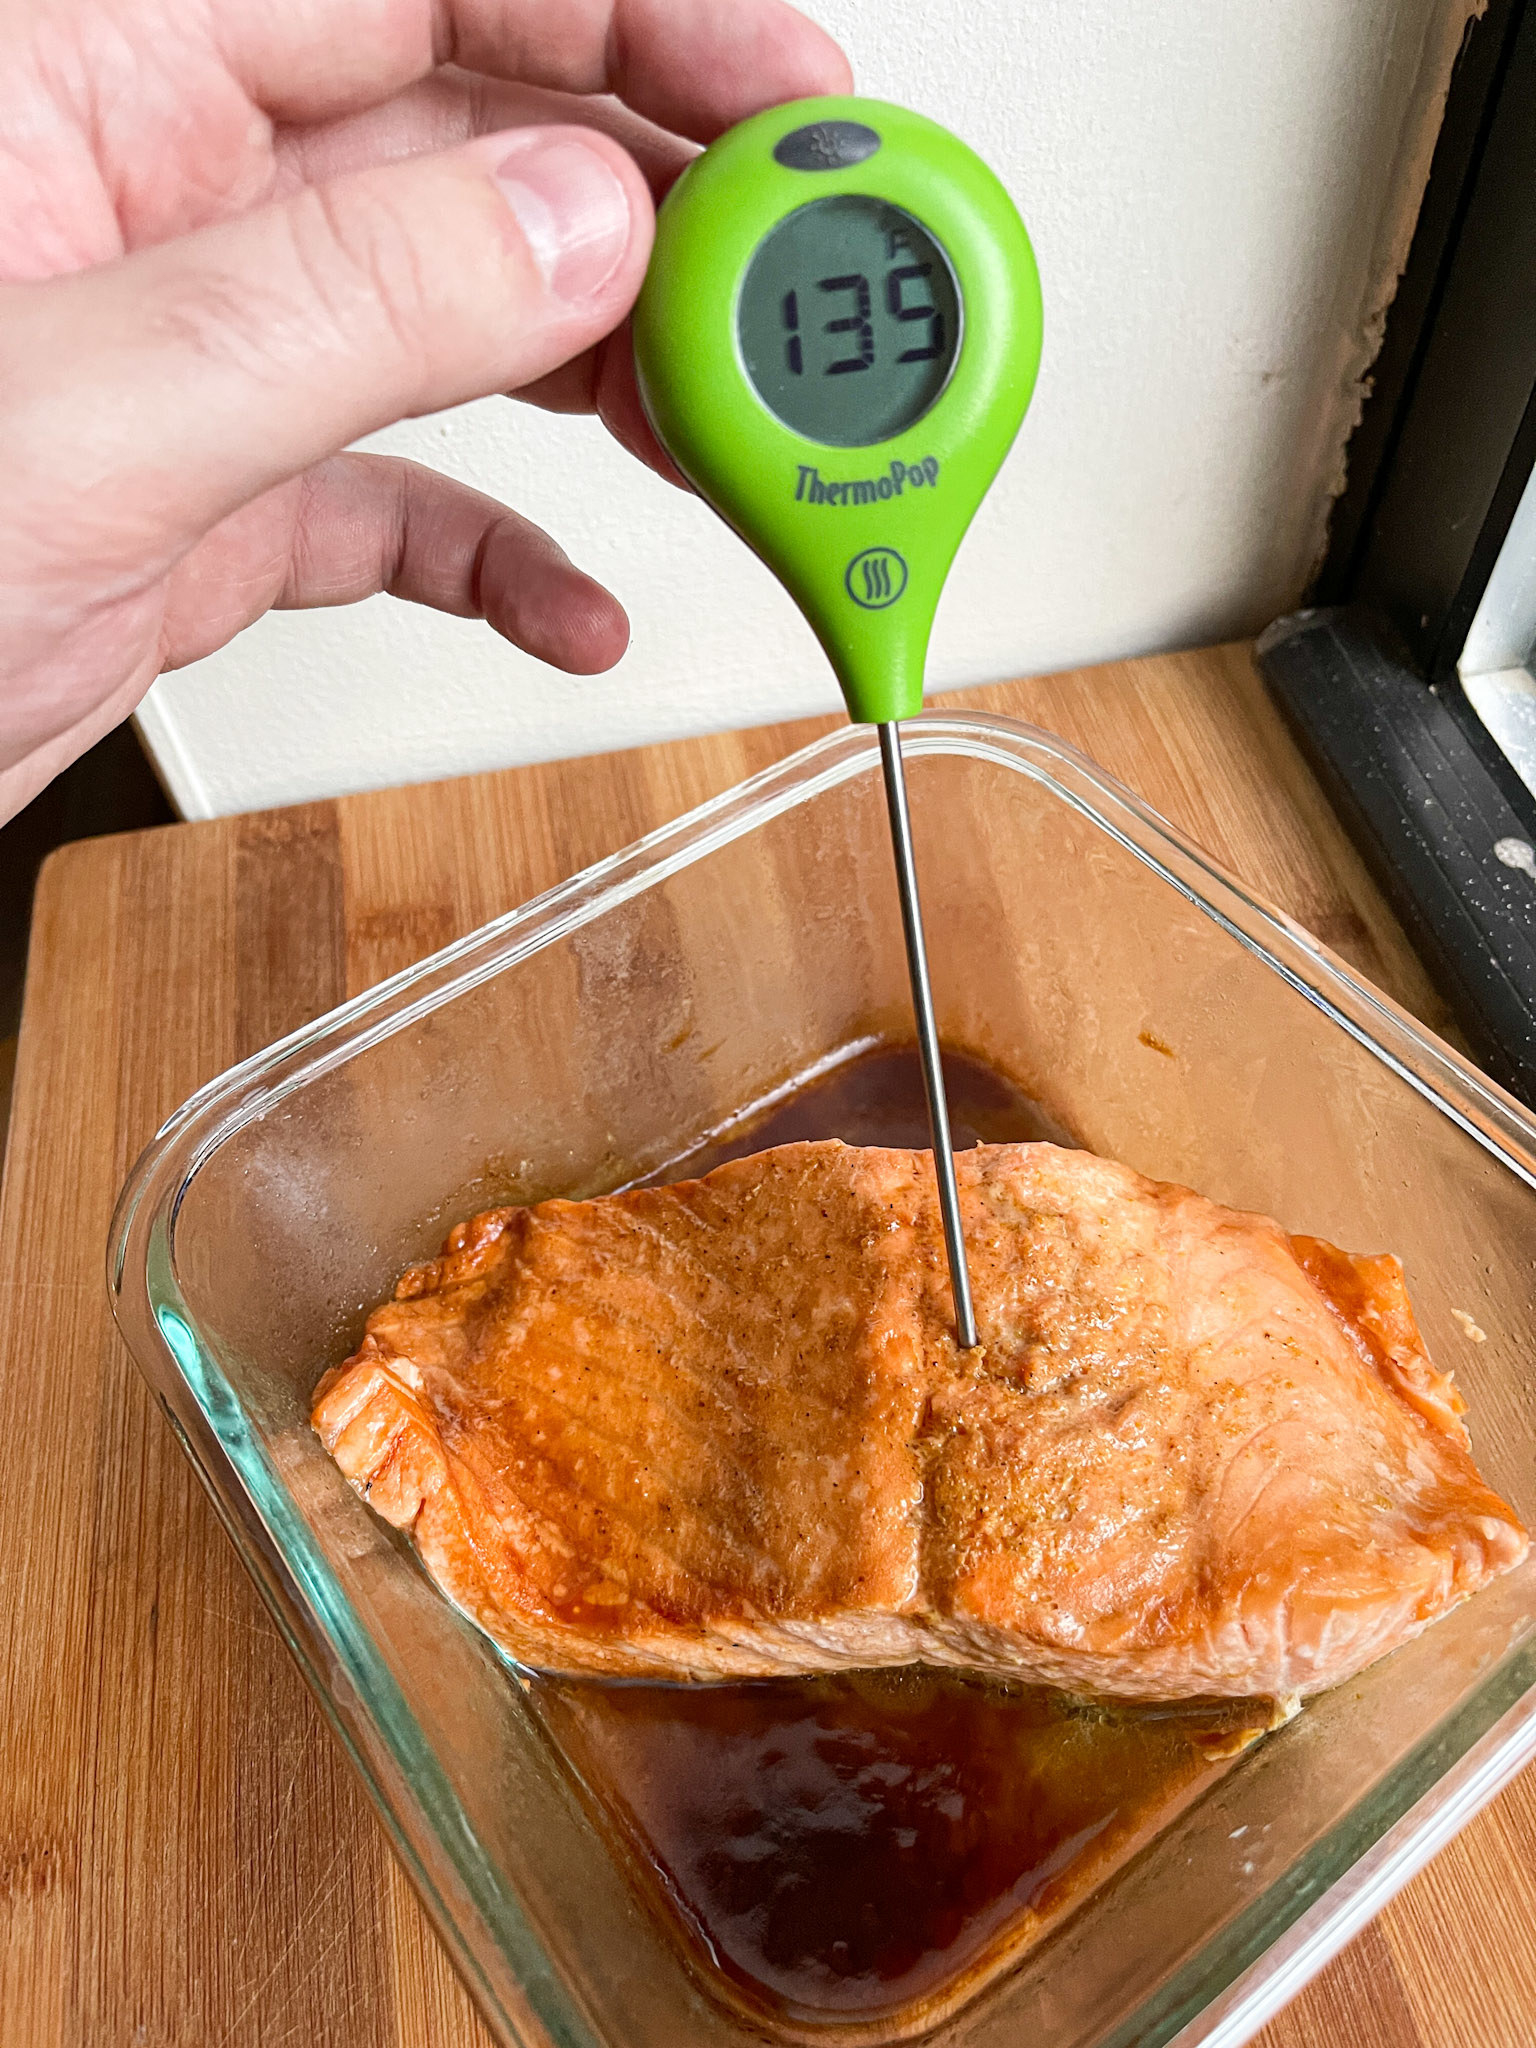 thermometer registers at 135 degrees when inserted into center of the salmon